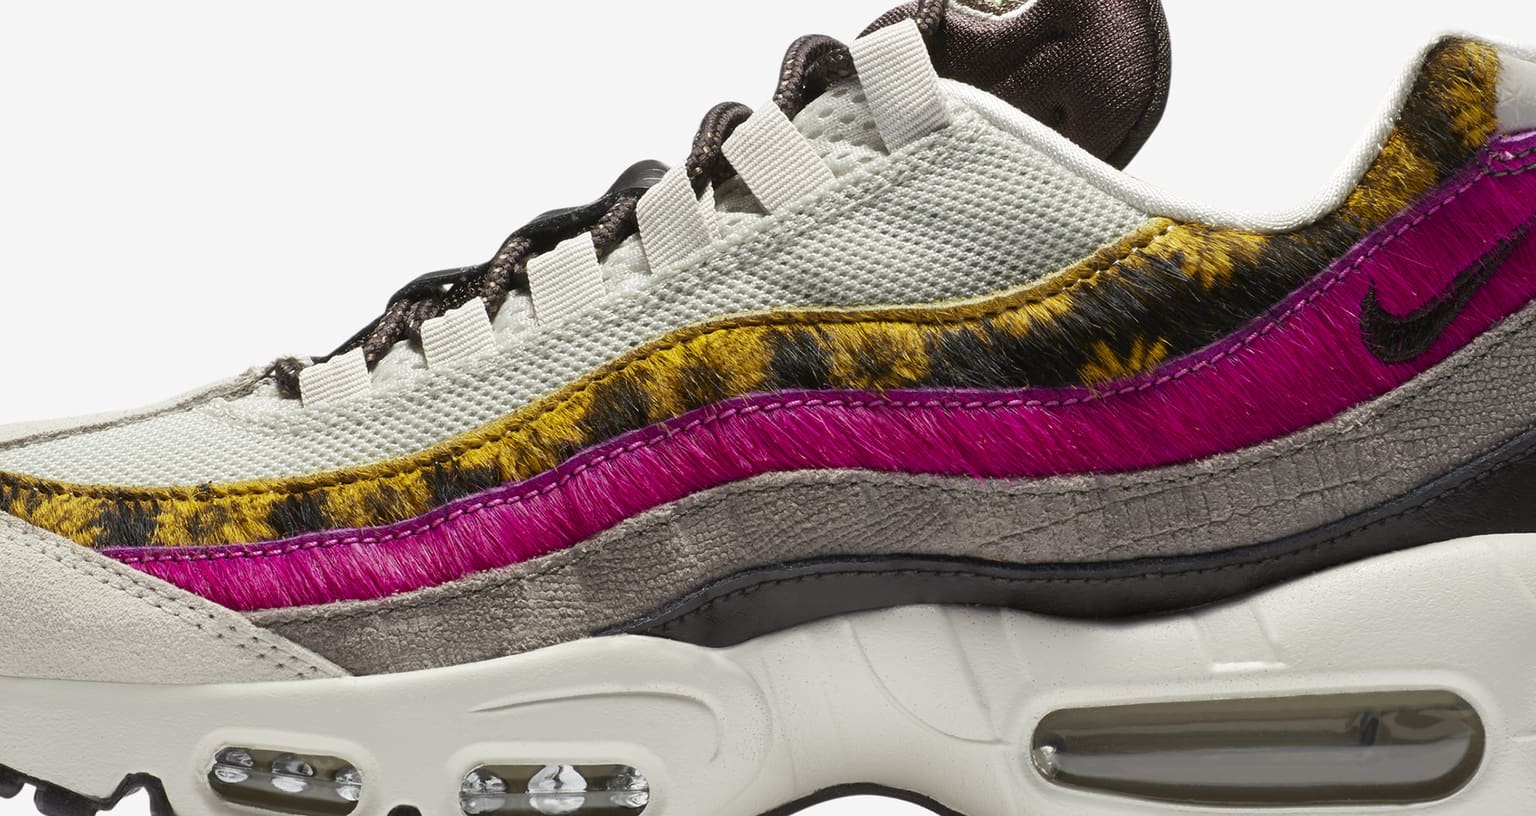 Air Max 95 “Daisy Chain” — дата релиза 